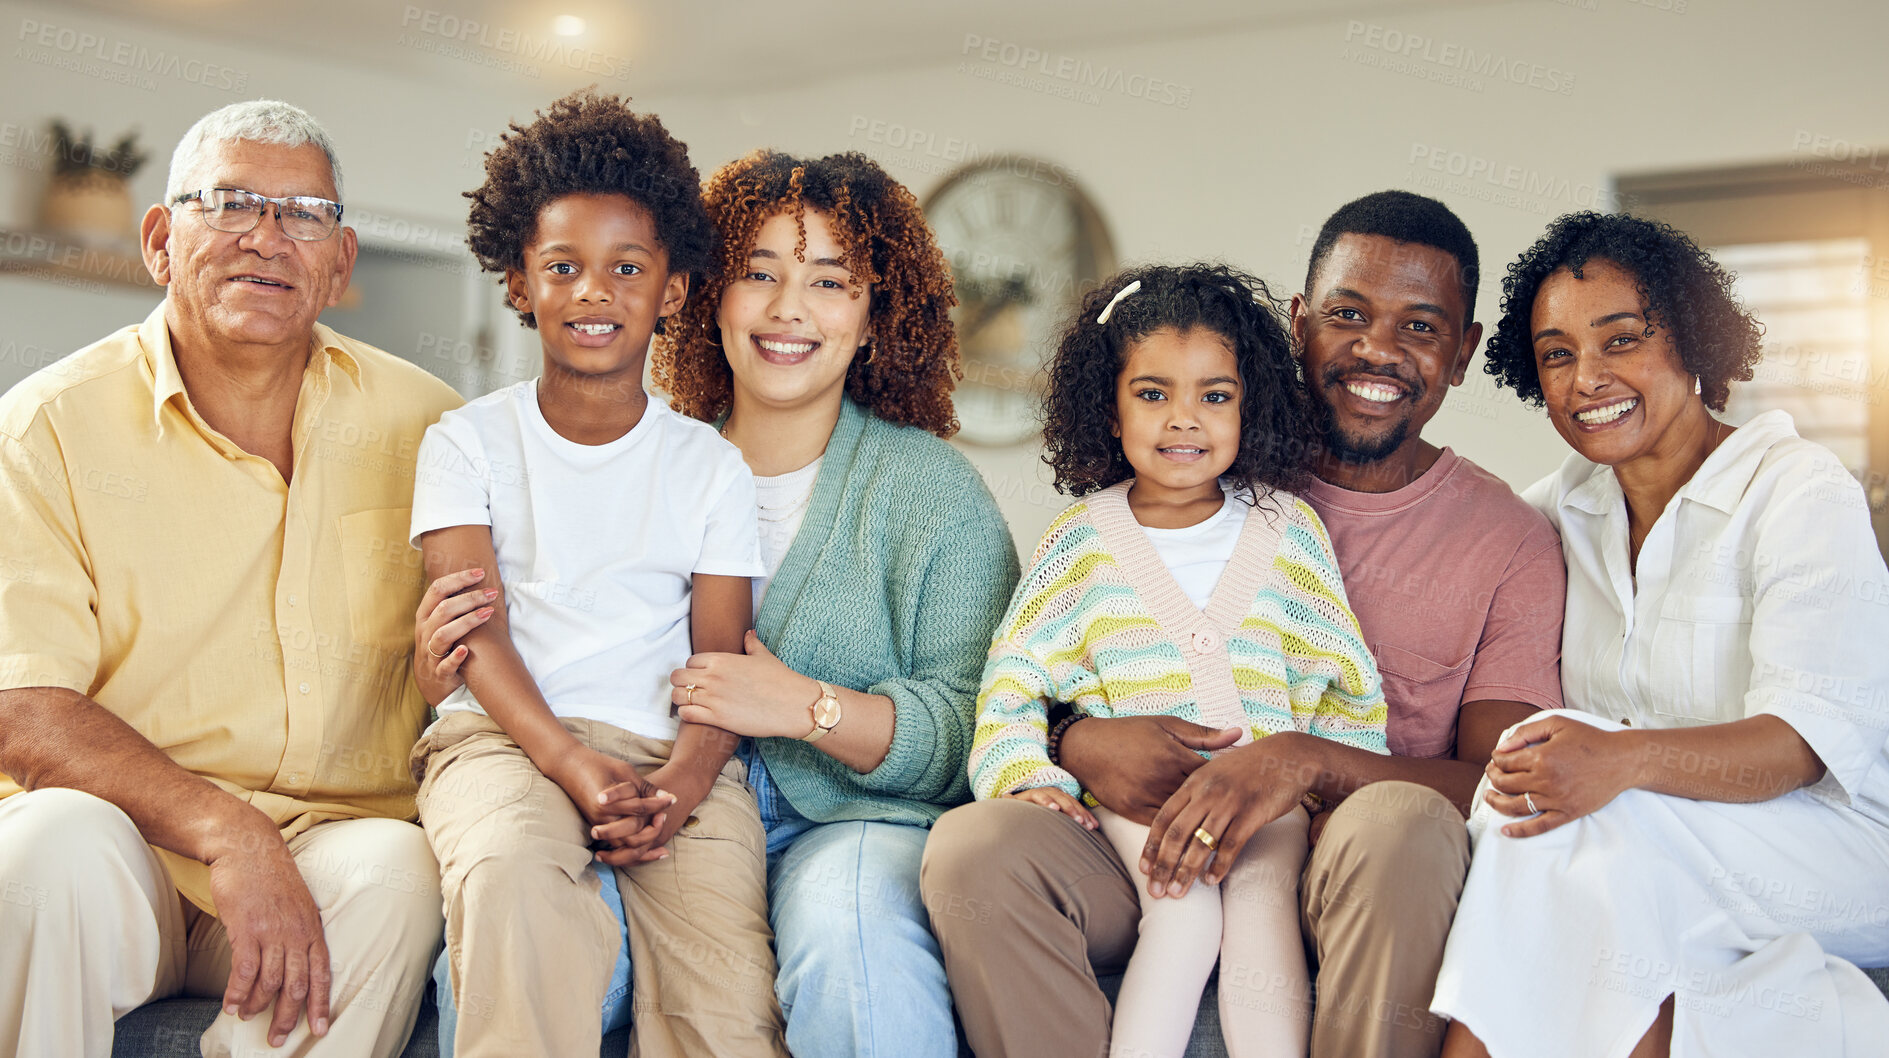 Buy stock photo Family portrait, generations and love with care and support at home, grandparents and parents with kids. Relax in living room, happy people together with unity and bonding, diversity and trust